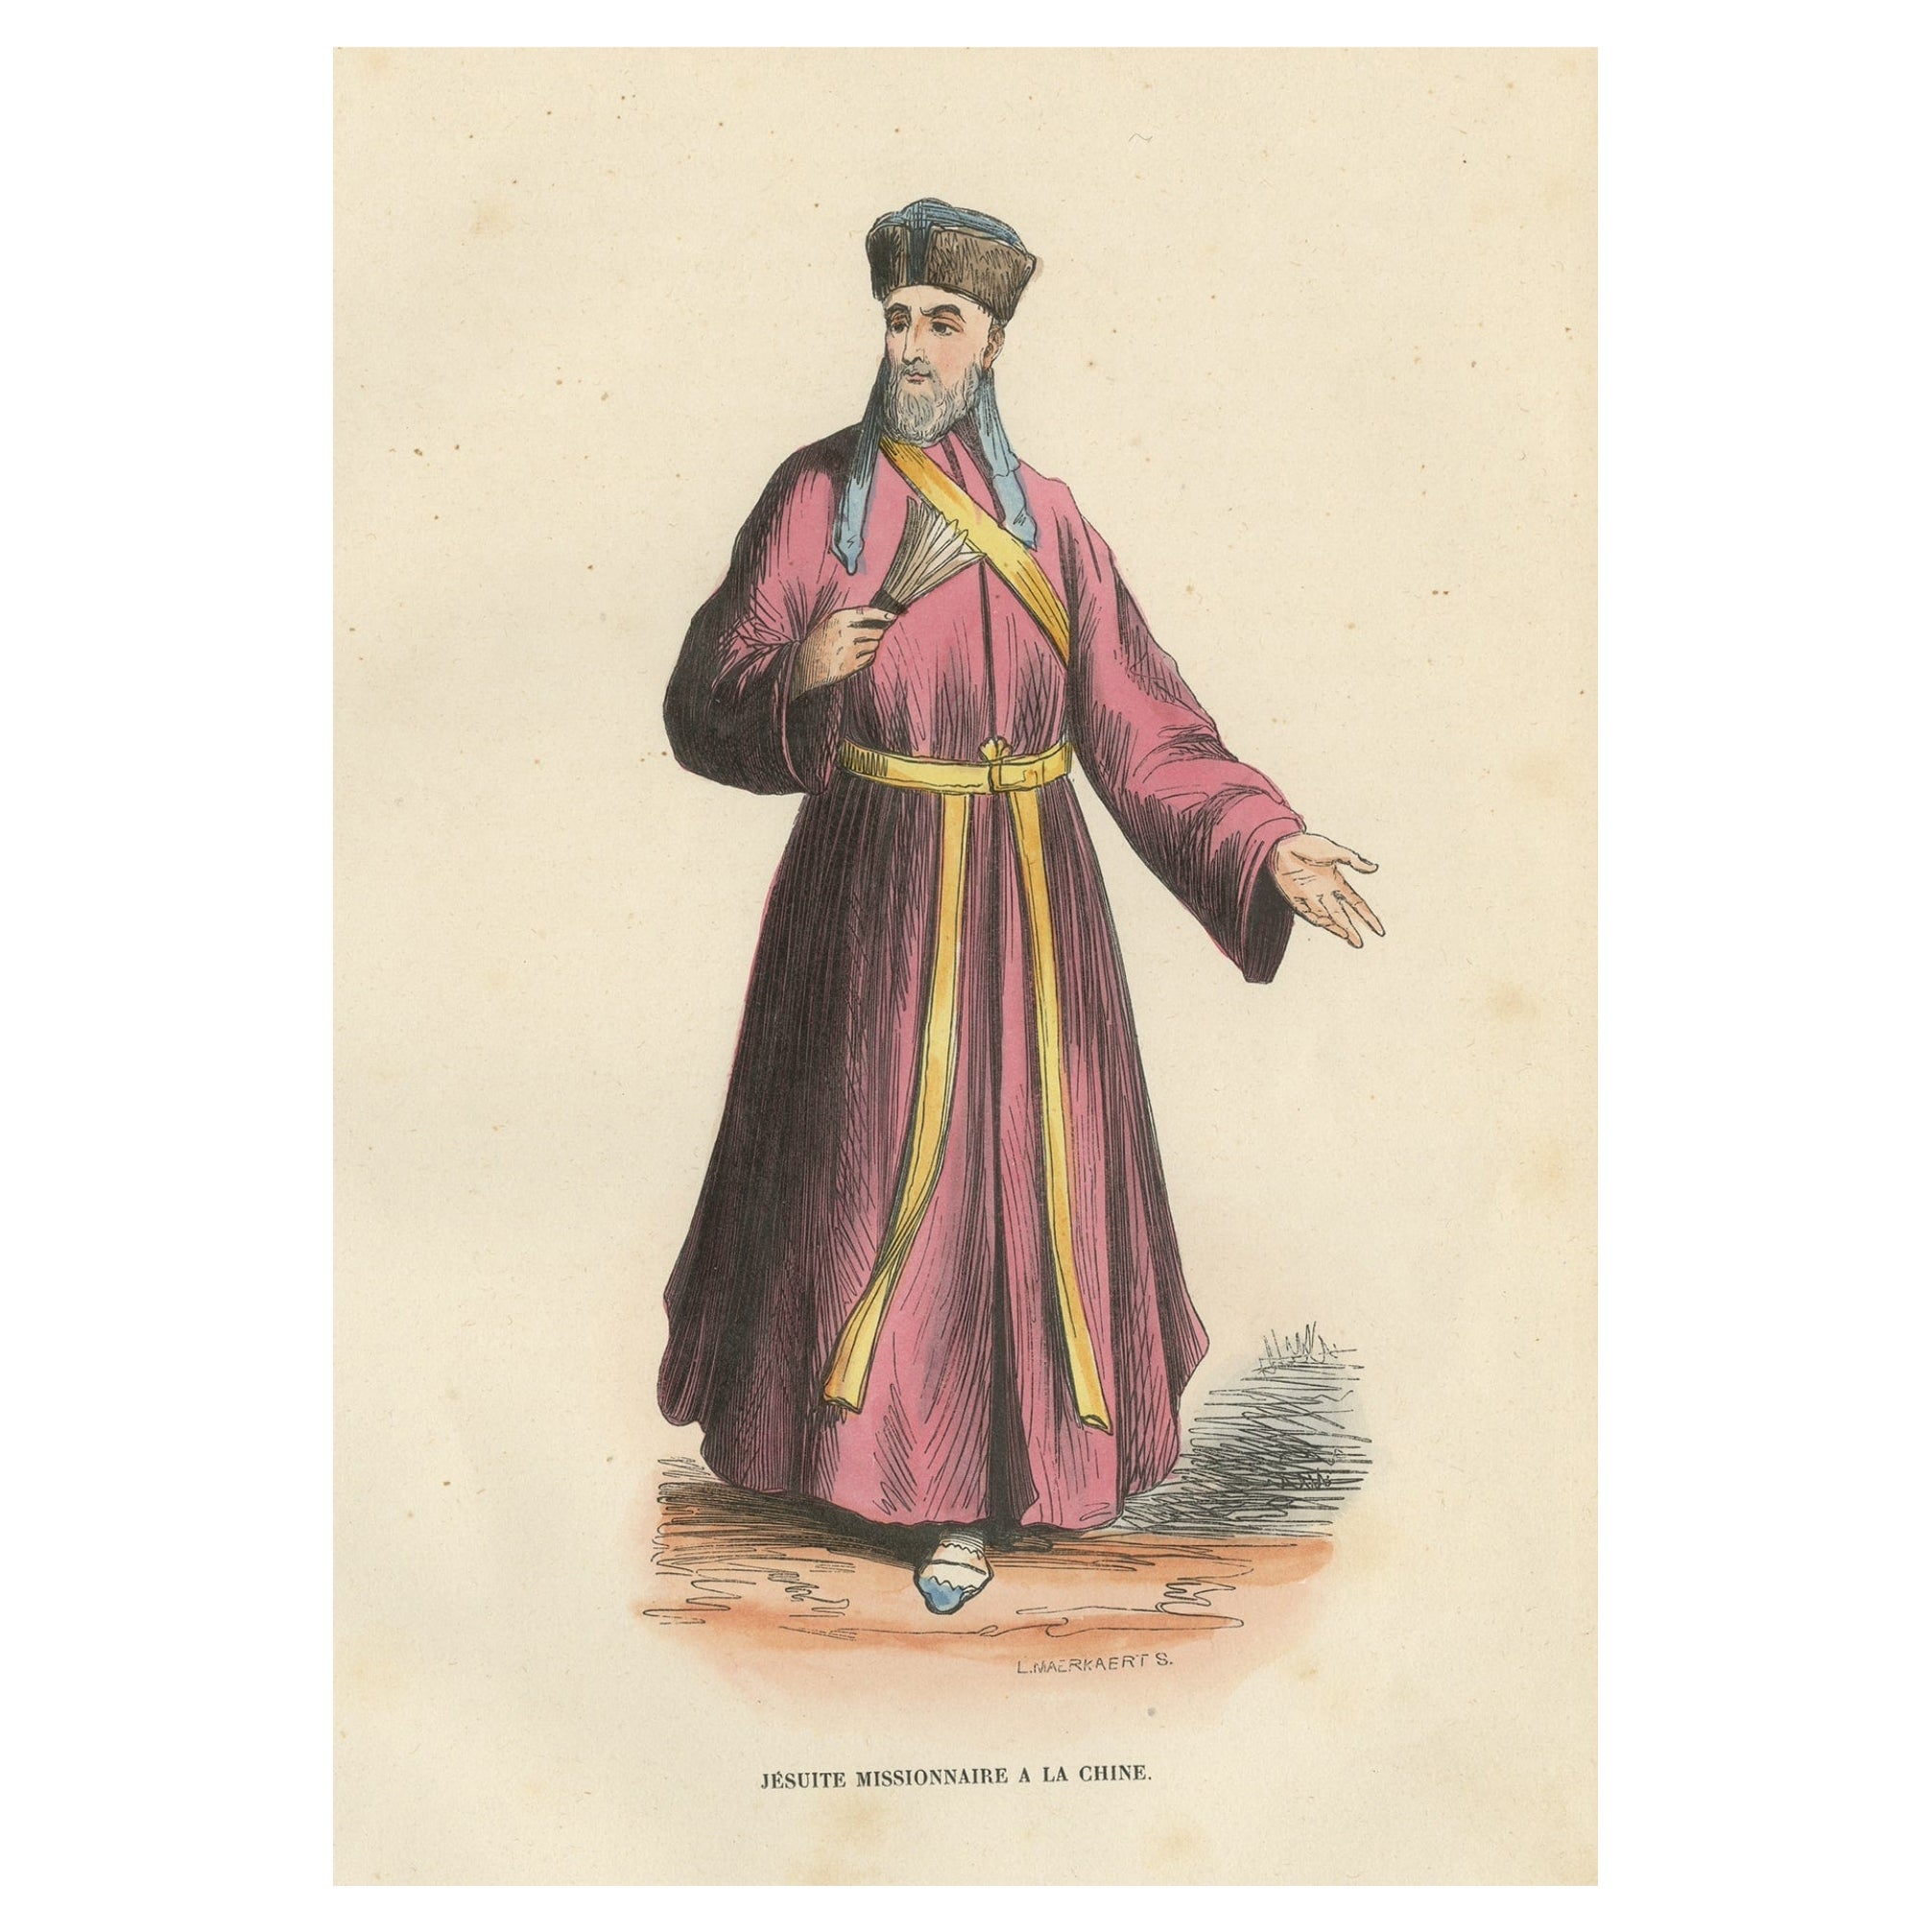 Original Hand-Colored Antique Print of a Jesuit Missionary in China, 1845